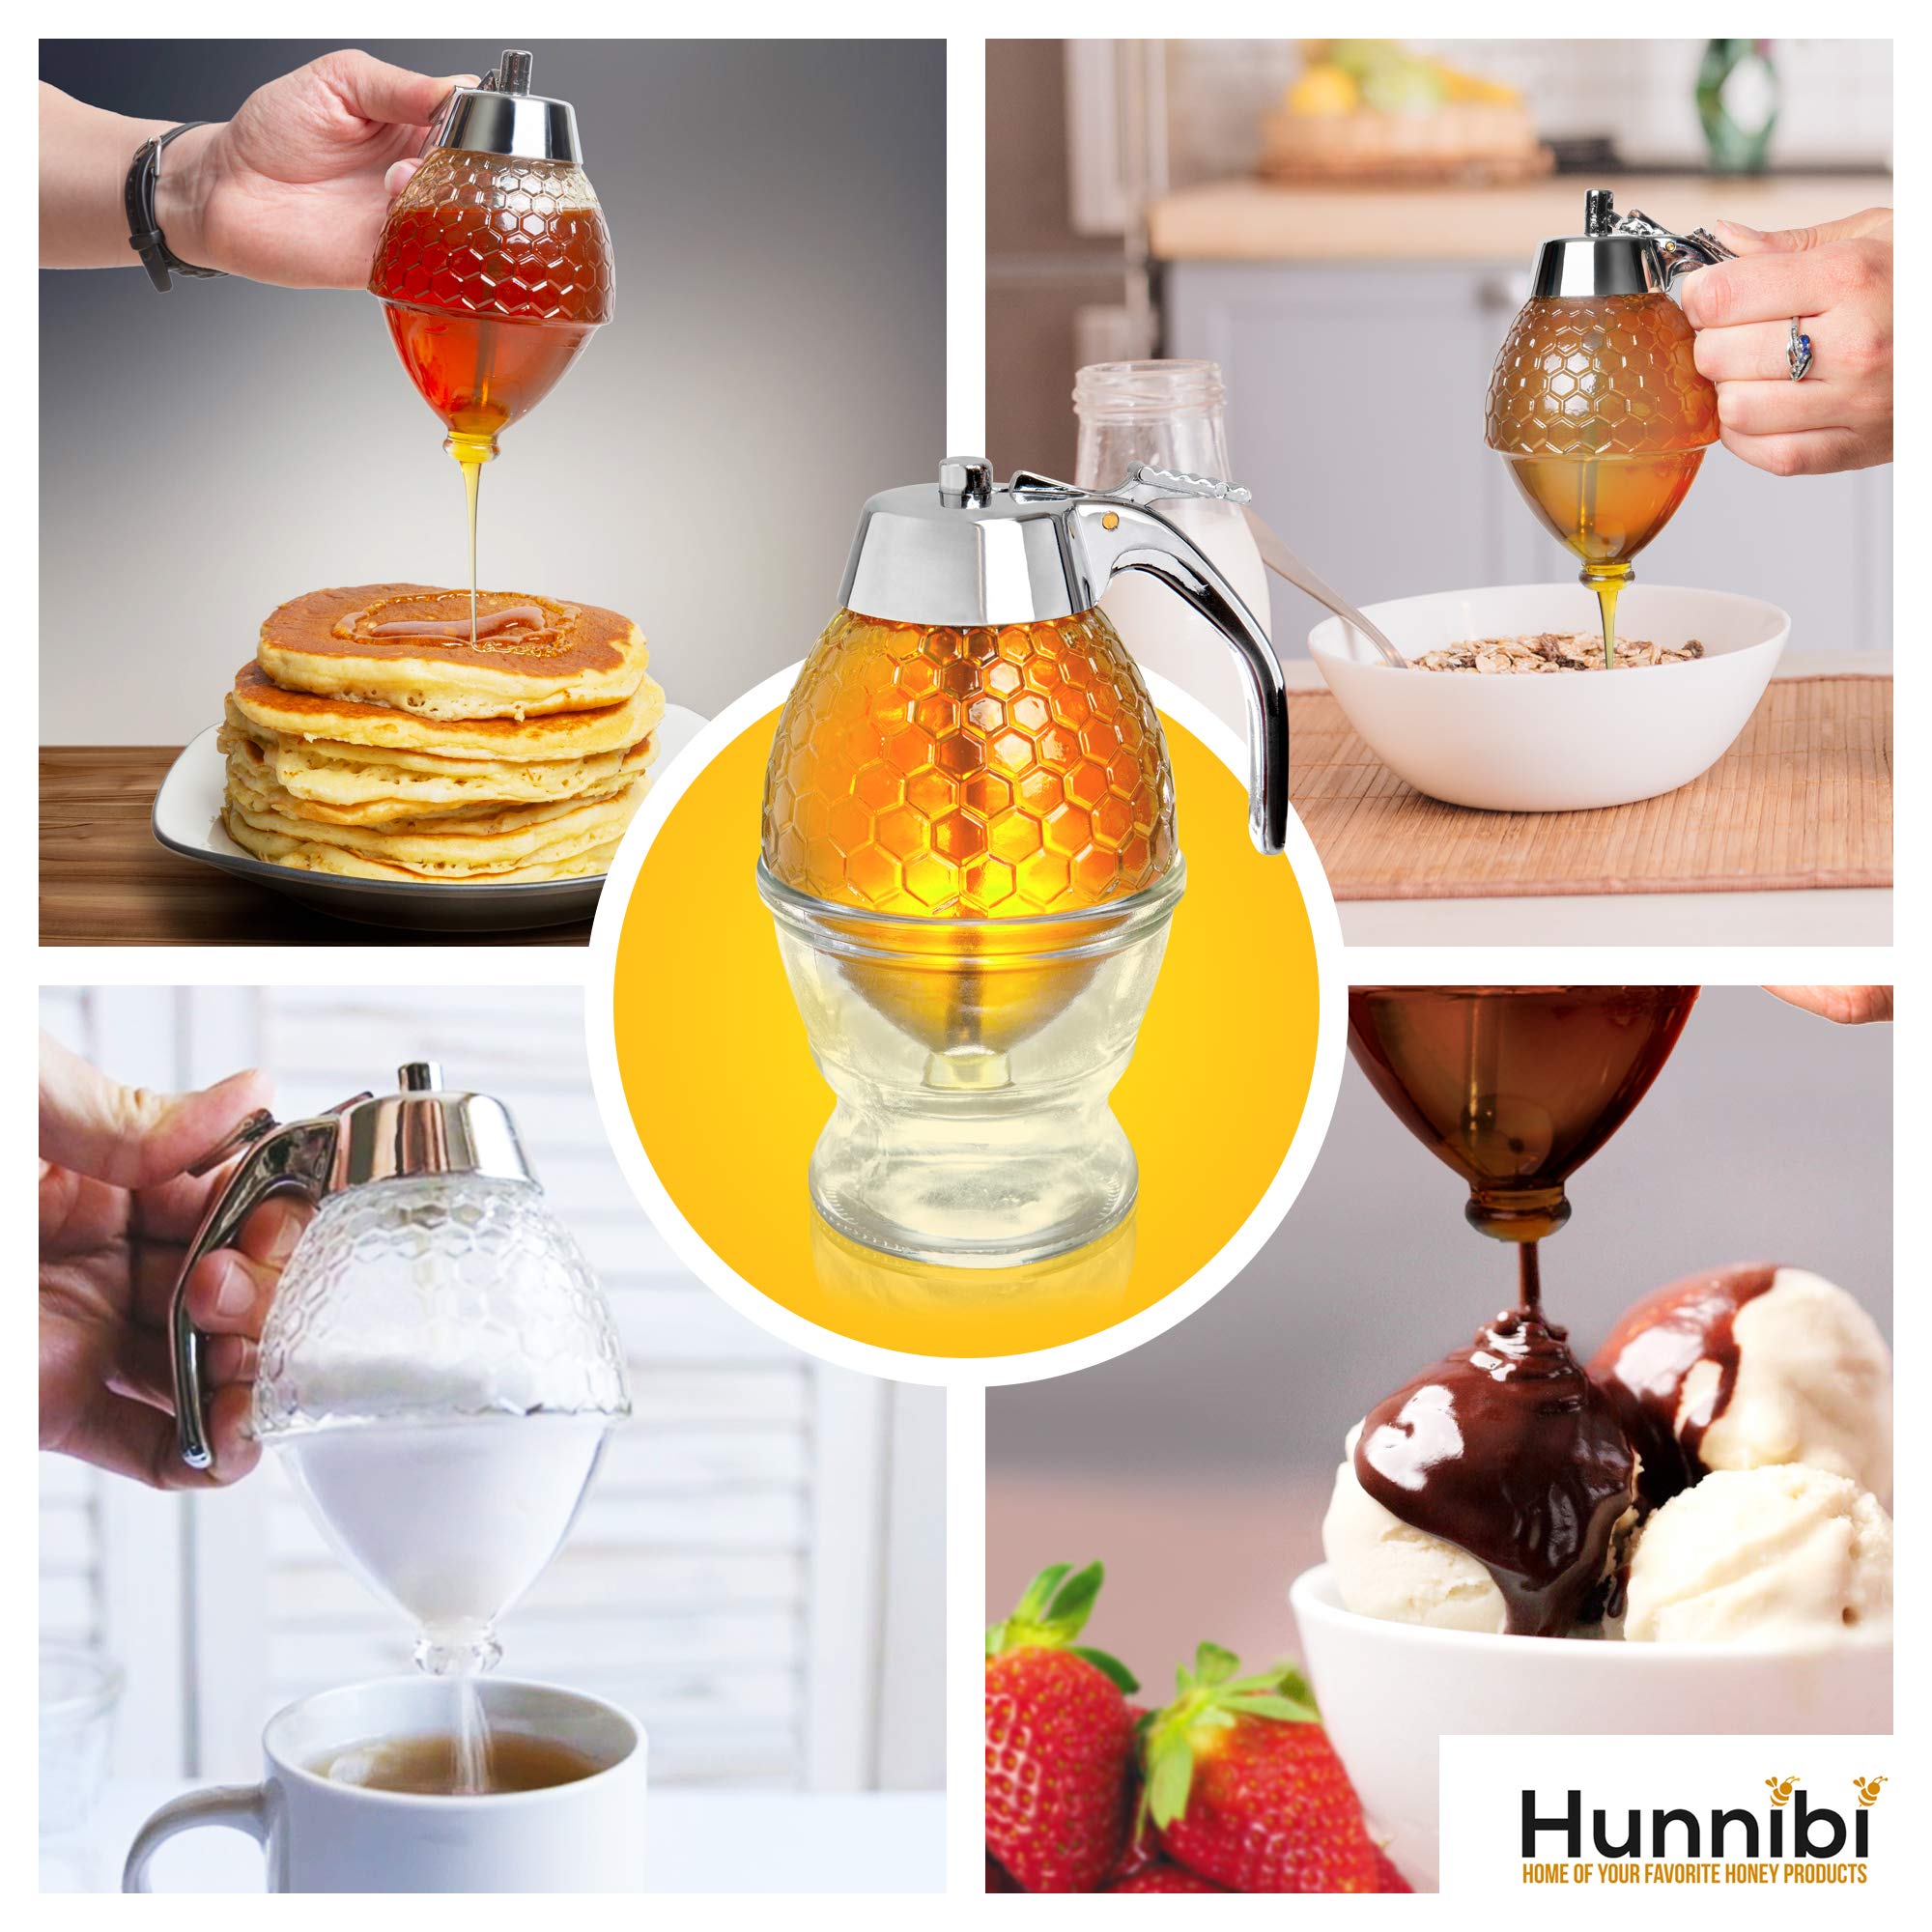 Hunnibi Glass Syrup Dispenser for Pancakes - Honey Dispenser No Drip Glass with Stand, Honey Glass Container, Glass Honey Dispenser, No Drip Honey Dispenser Glass, Syrup Dispenser, Syrup Bottle 8 oz  - Like New